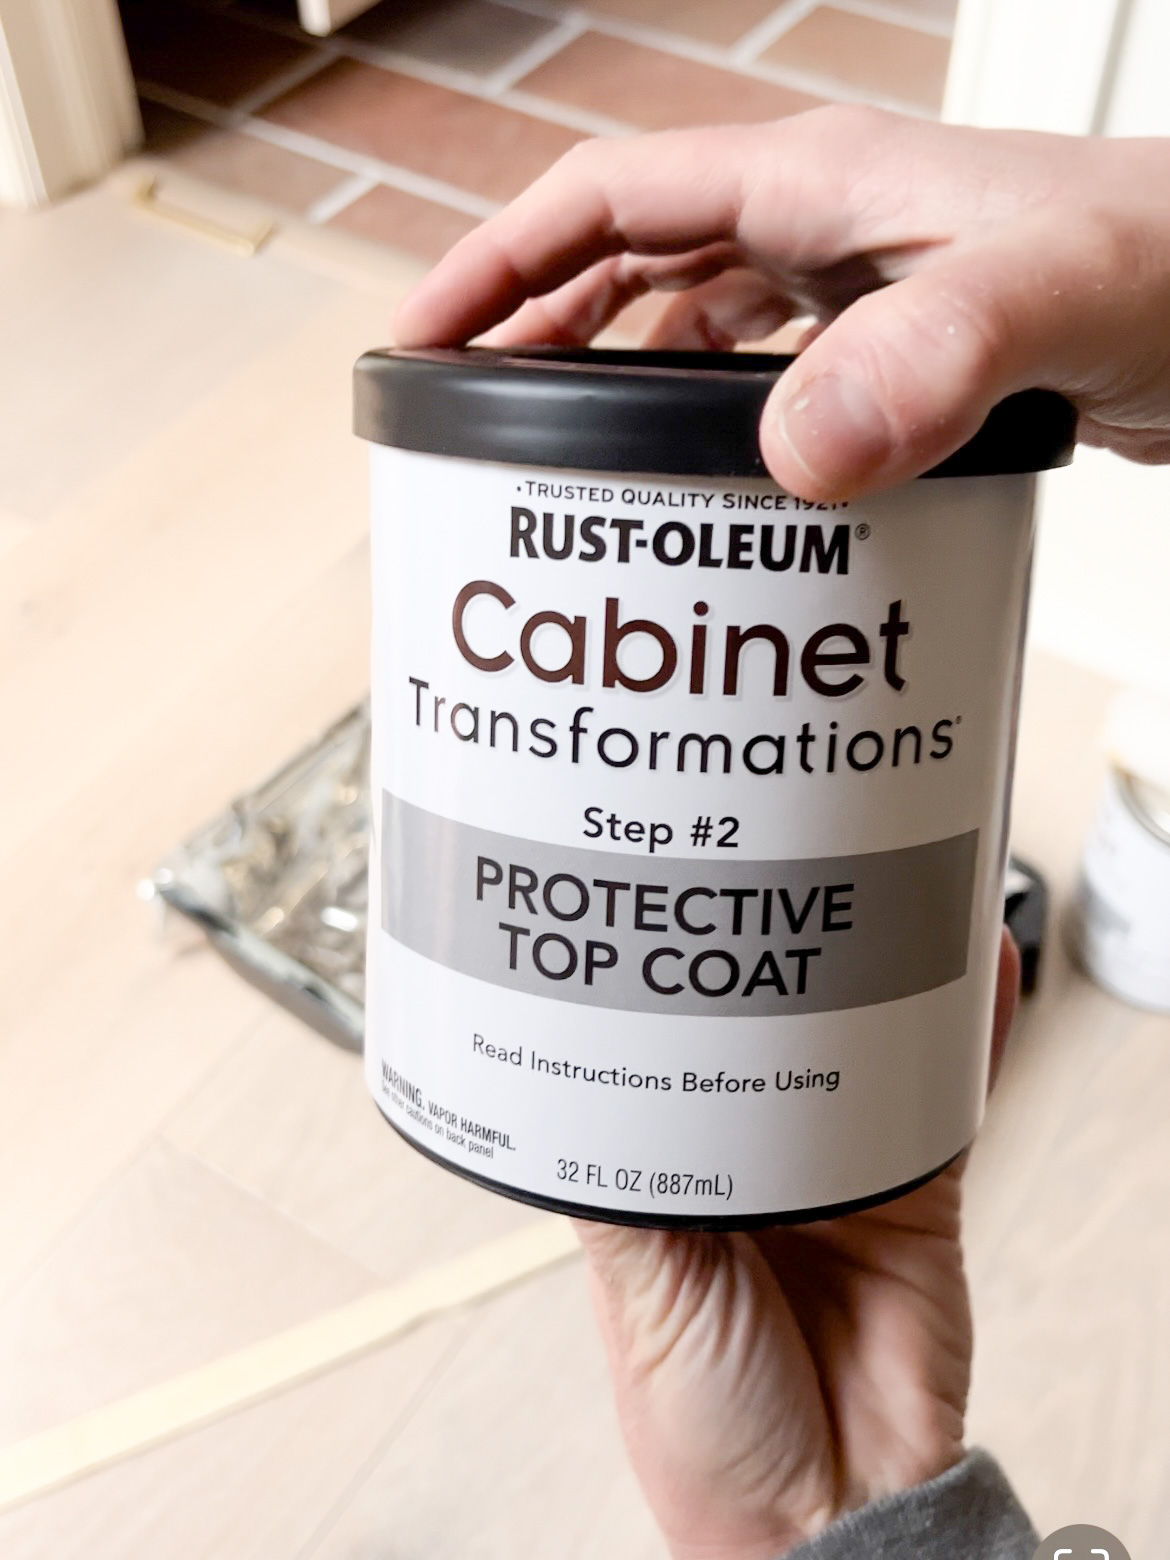 Top Coat from Rustoleum's Cabinet Transformations Kit.